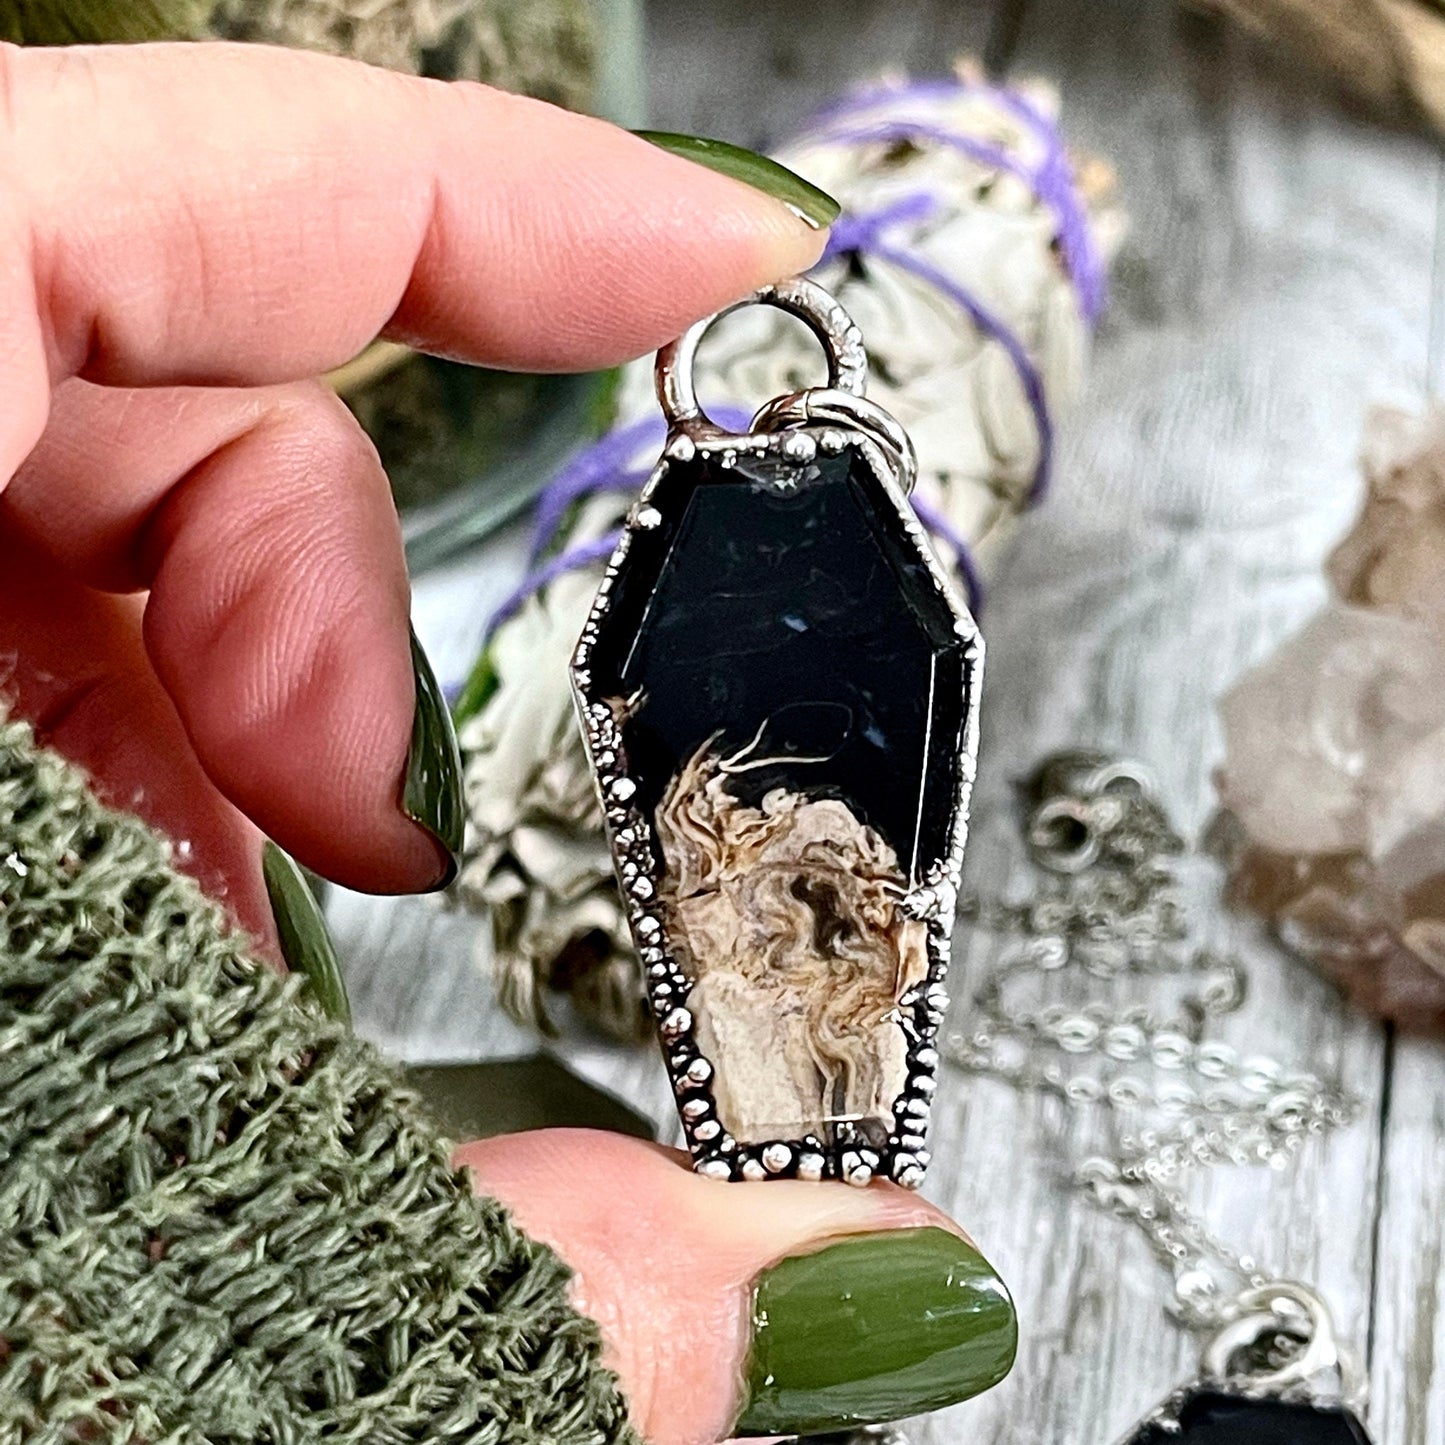 Bohemian Fashion, Bohemian Jewelry, Crystal Jewelry, Crystal Necklace, Crystal Necklaces, Crystal pendant, Etsy ID: 1164611139, Fossilized Palm Root, FOXLARK- NECKLACES, Healing Crystal, Jewelry, Jewelry For Woman, Necklaces, Sterling Silver, Stone Neckla